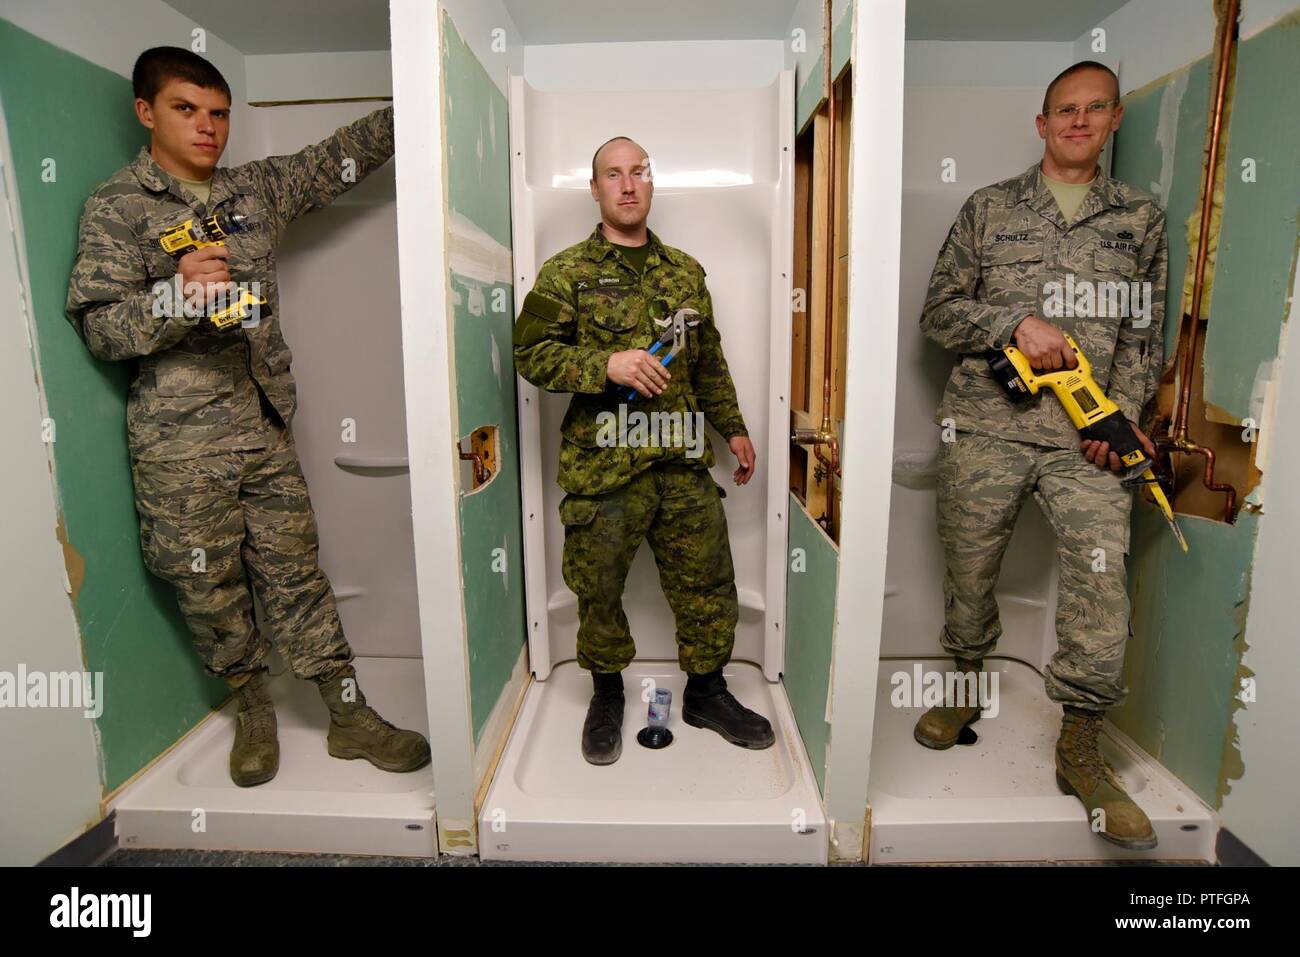 Oregon Air National Guard Staff Sgt. Benjamin Schultz (right), along with Airman 1st Class Joshua Bietschek (left), and Canadian Armed Forces (CAF) Corporal Kyle Burrow (center) pause momentarily for a photograph together as they work on various tasks to rebuild three showers at the military personnel building in Yellowknife, Northwest Territories, Canada, July 21, 2017. The Oregon Airmen are also collaborating with Canadian Armed Forces members from Cold Lake, Alberta, who are also deployed to Yellowknife for training. Stock Photo